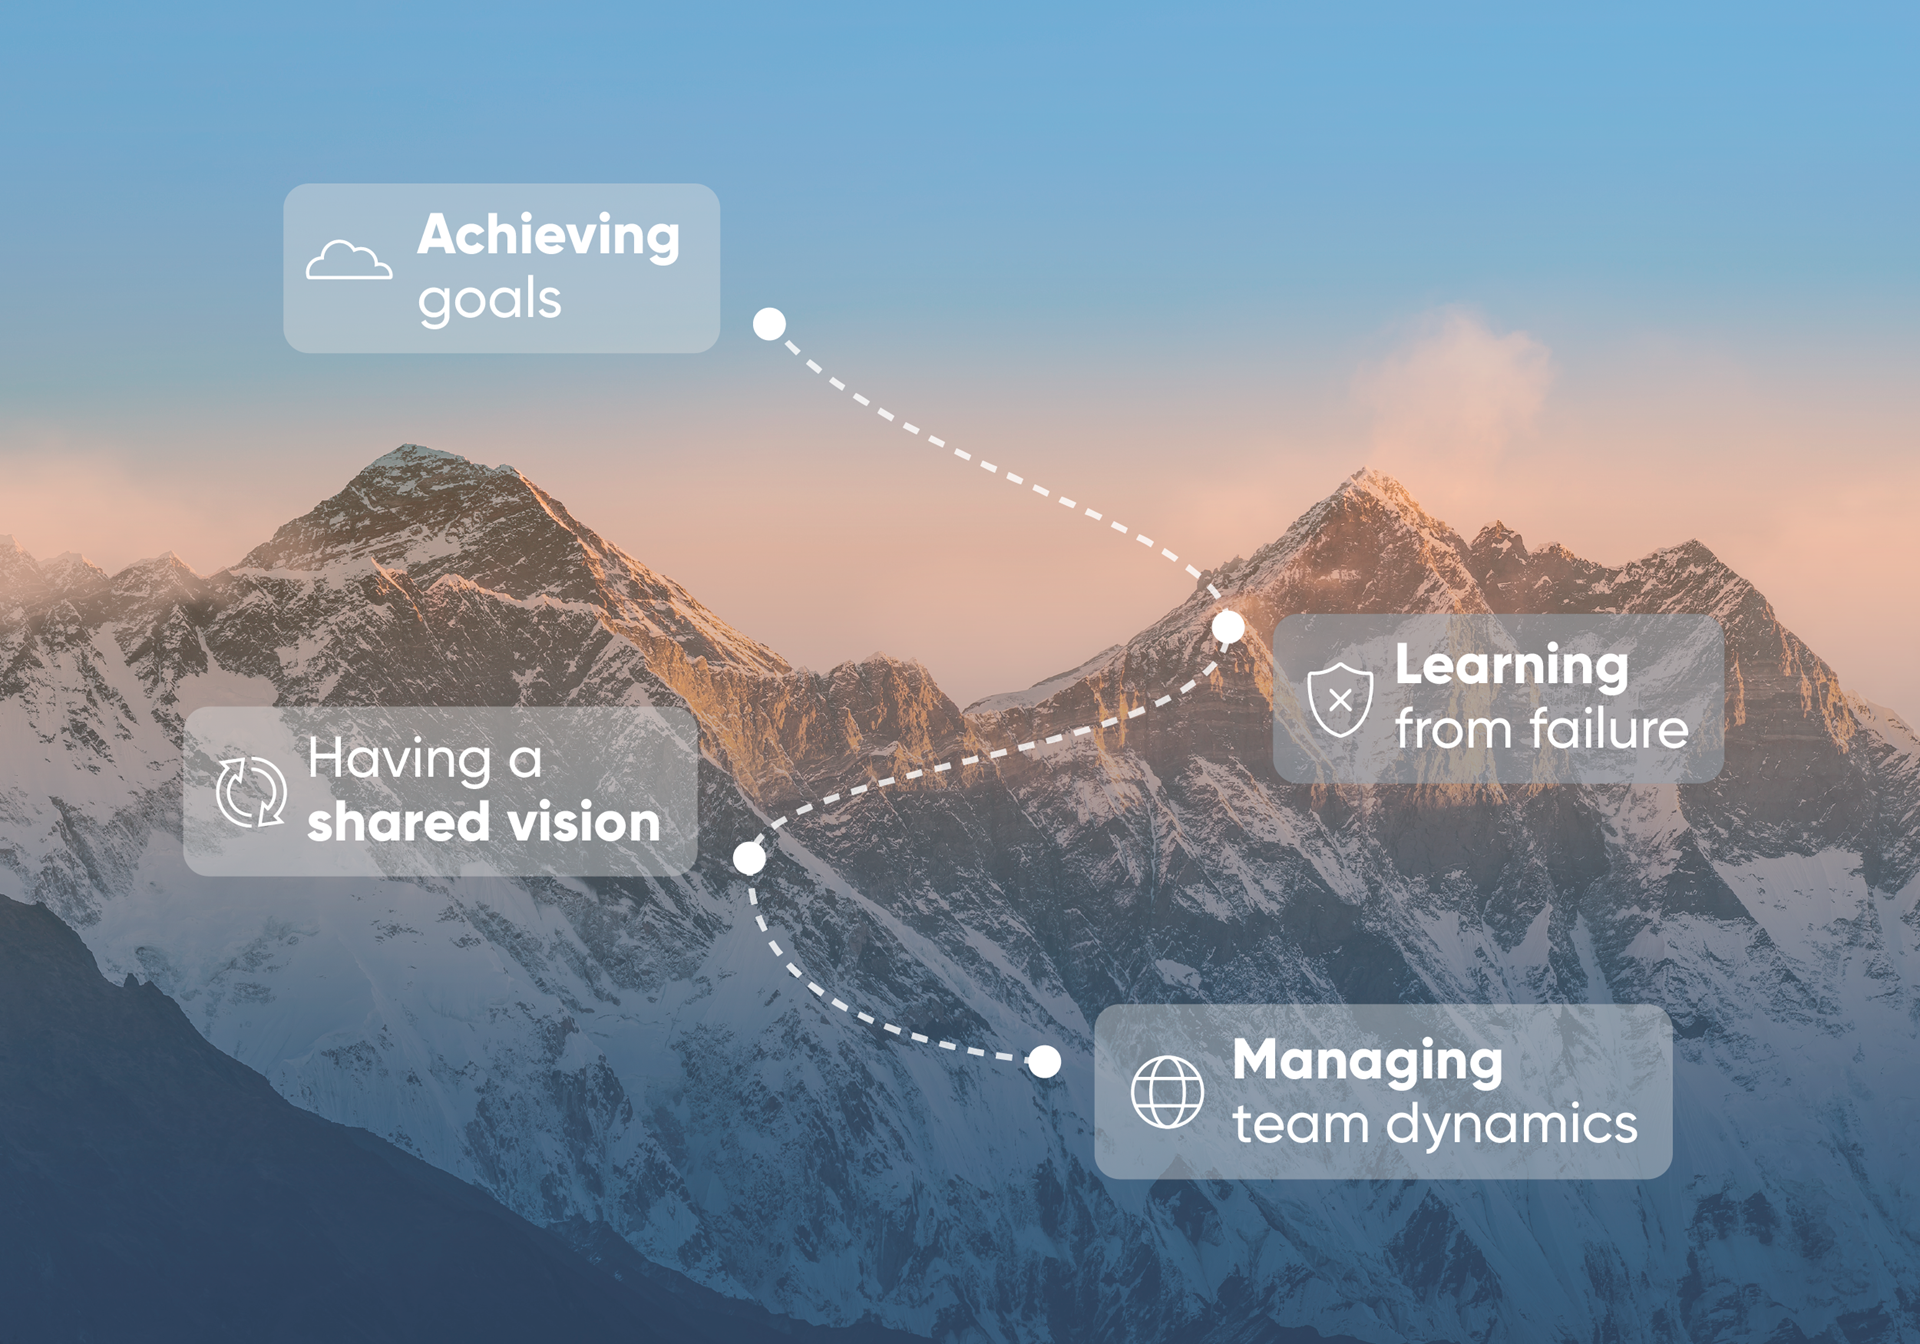 How a shared vision can help people climb mountains